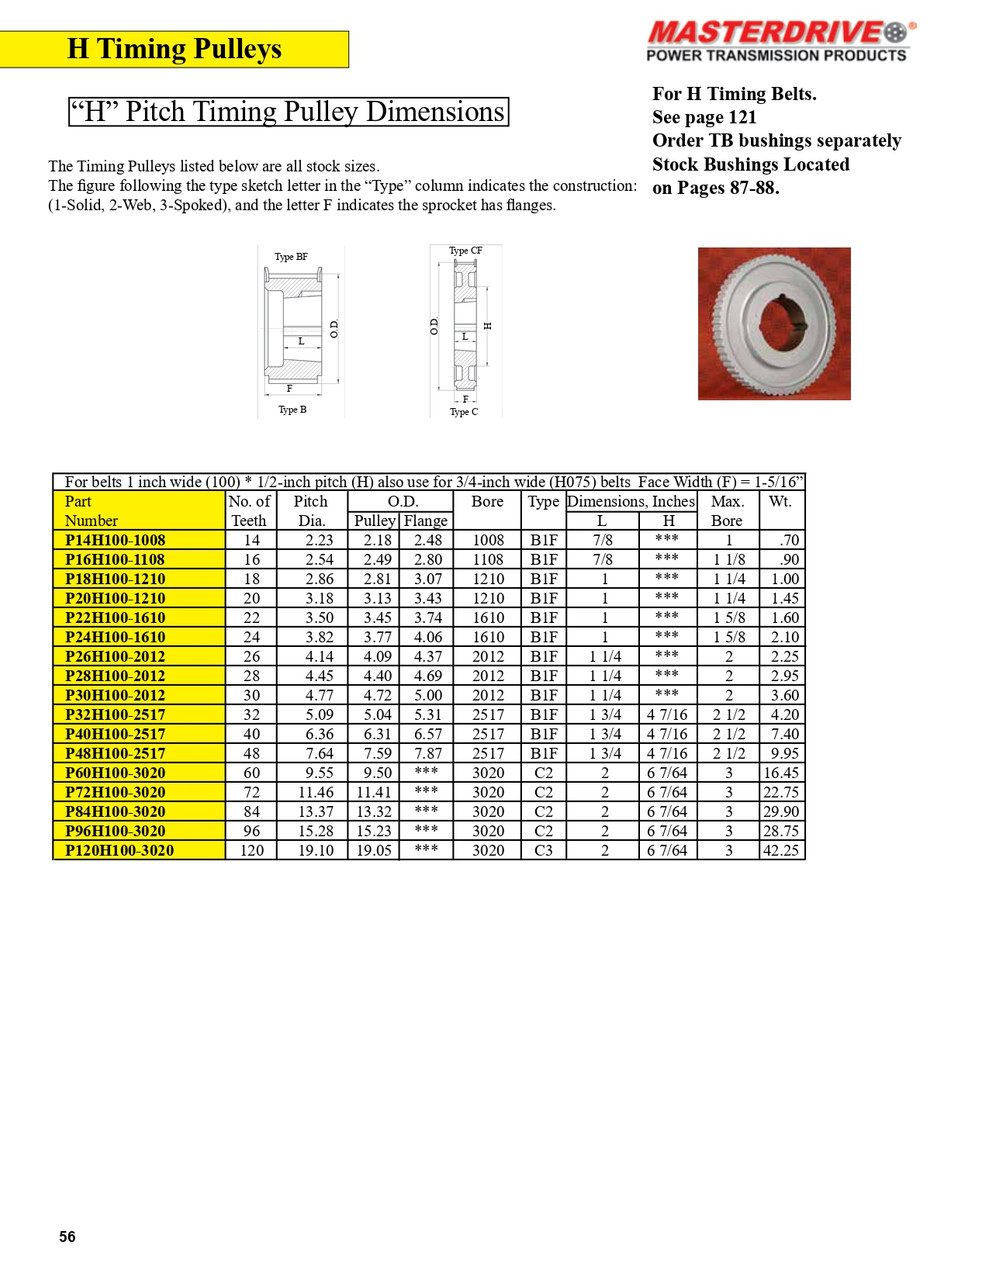 28 Tooth "H" Pitch "TB" Timing Pulley  P28H100-2012